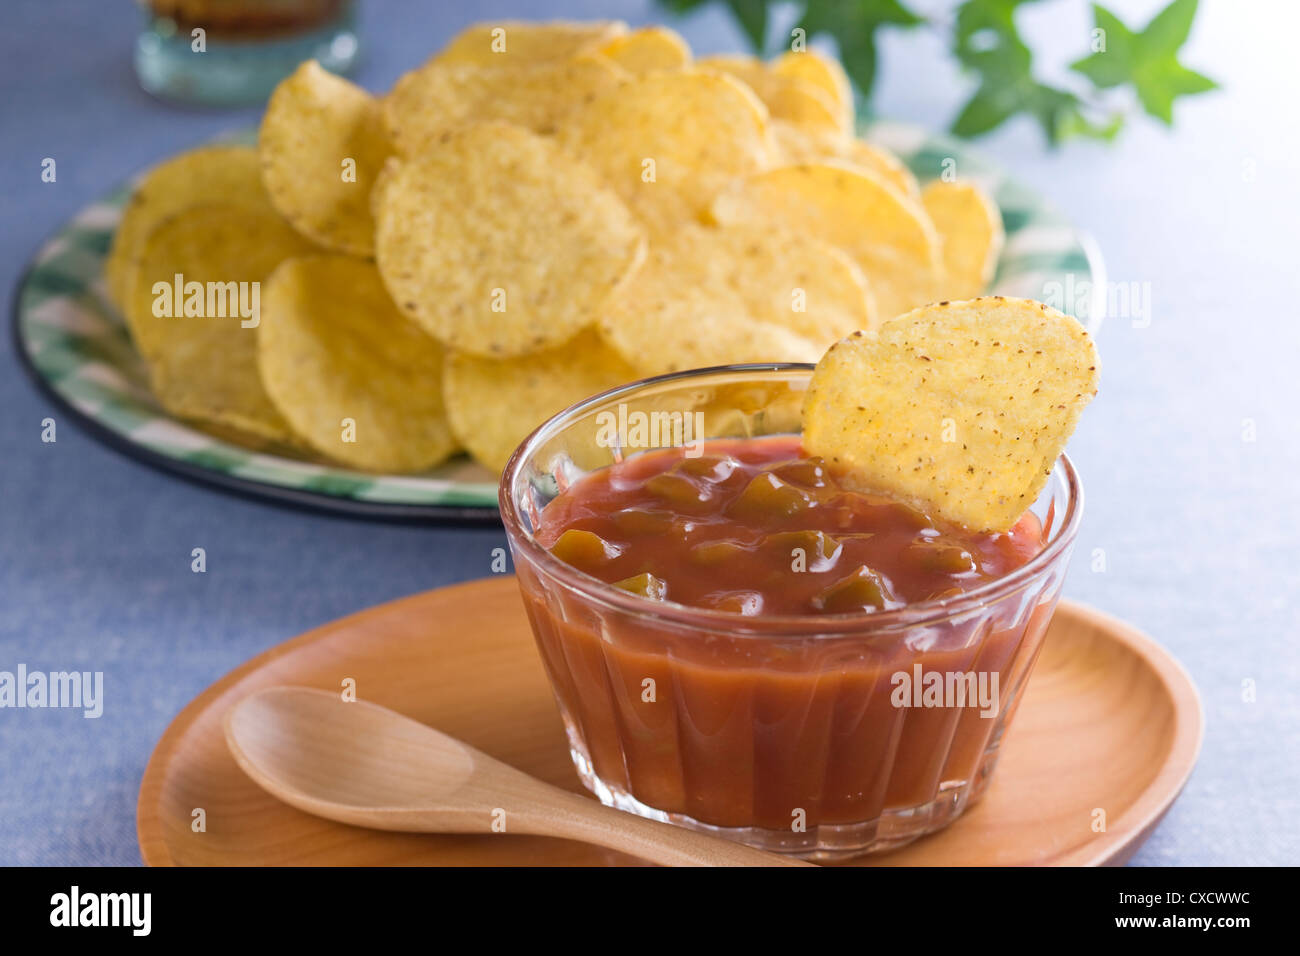 Dipping Corn Chips into Salsa Stock Photo